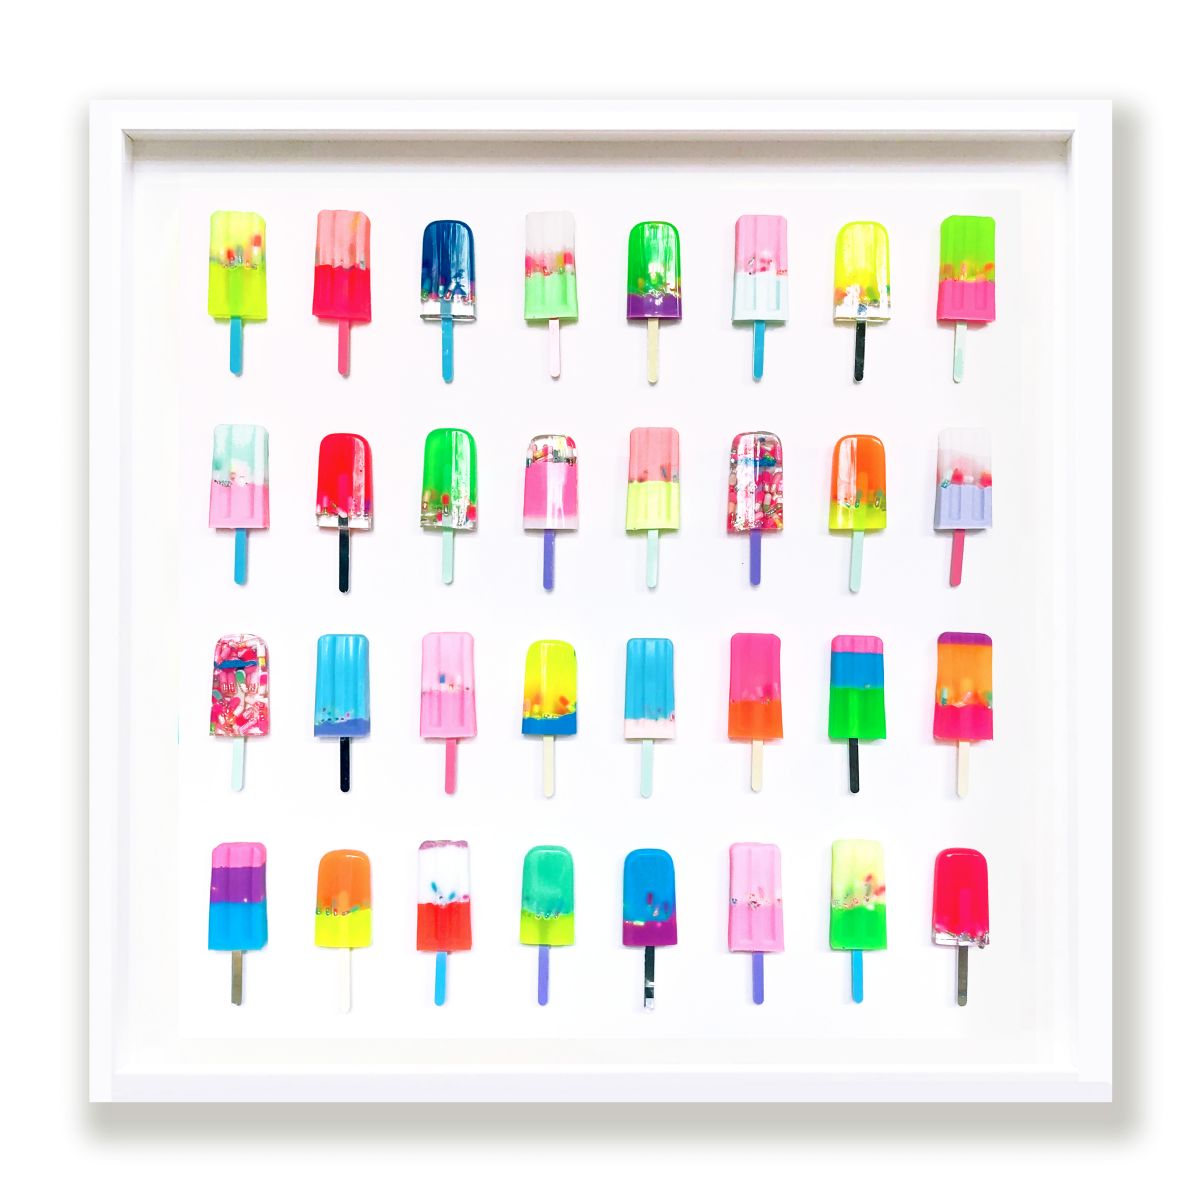 Lolly Pills XL by Emma Gibbons